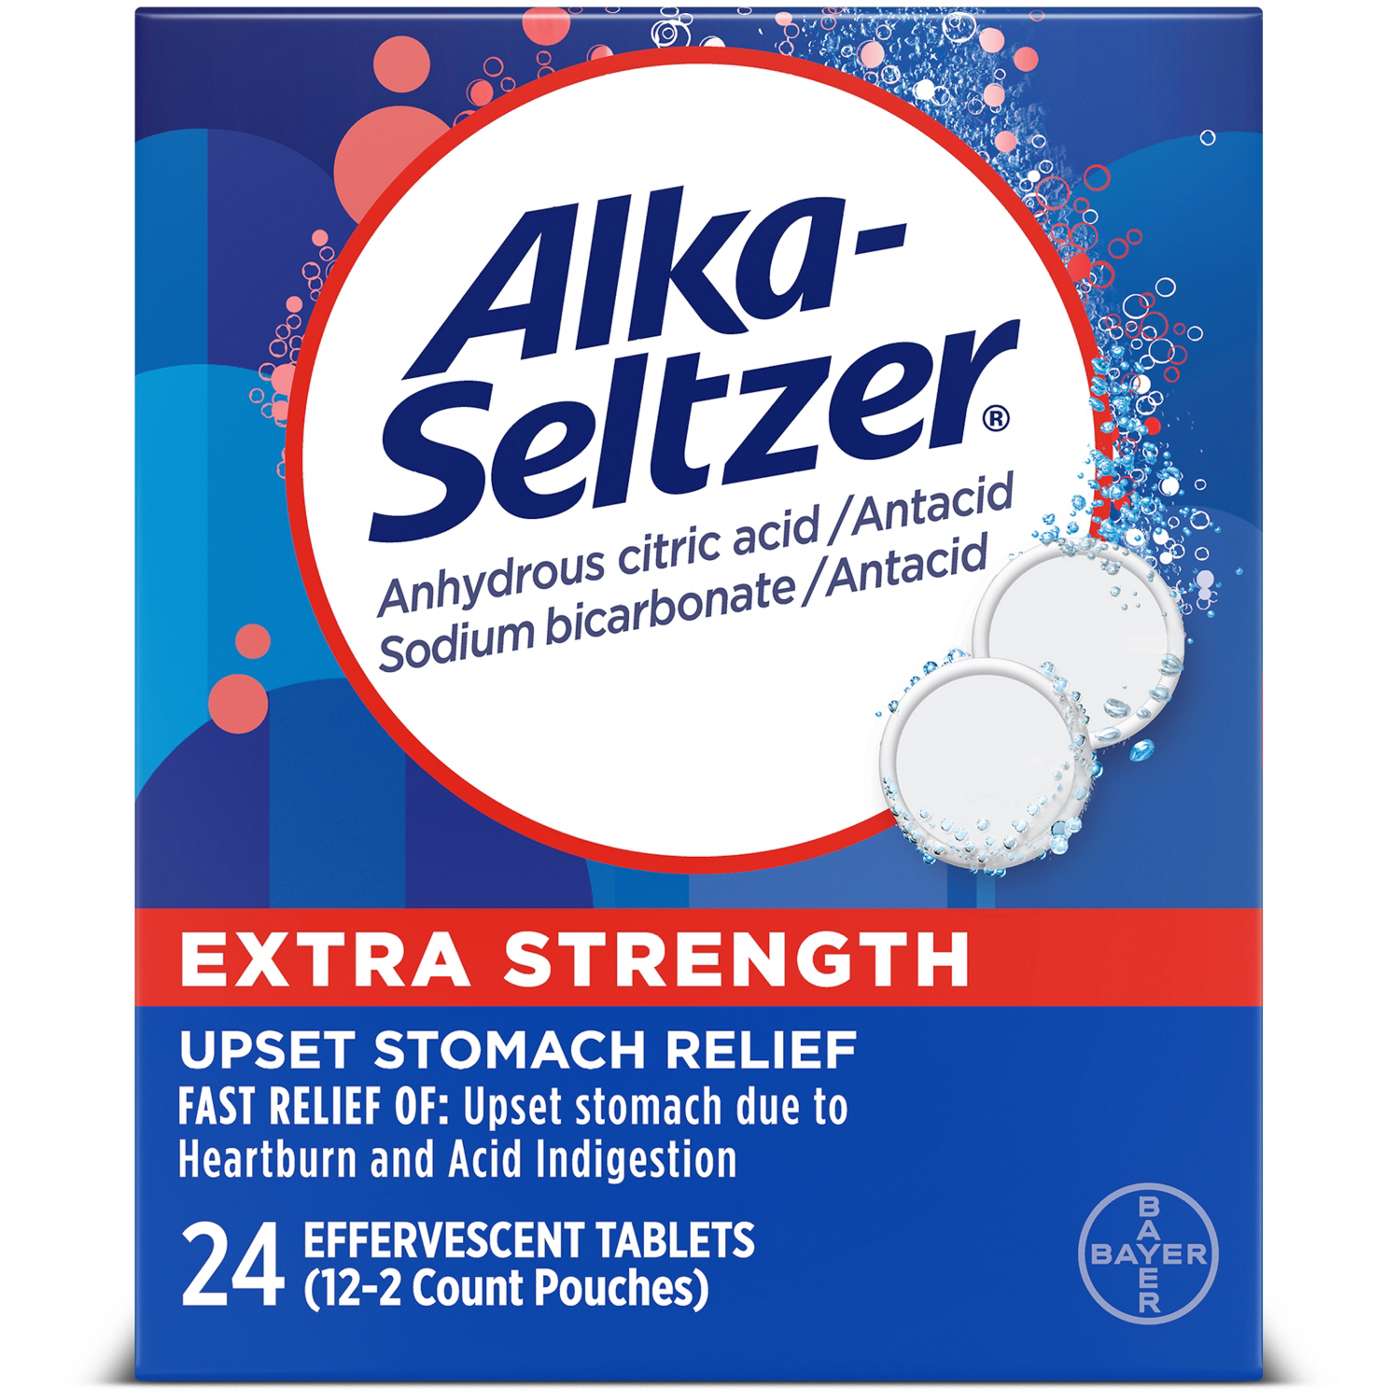 Alka-Seltzer Extra Strength Tablets; image 1 of 10